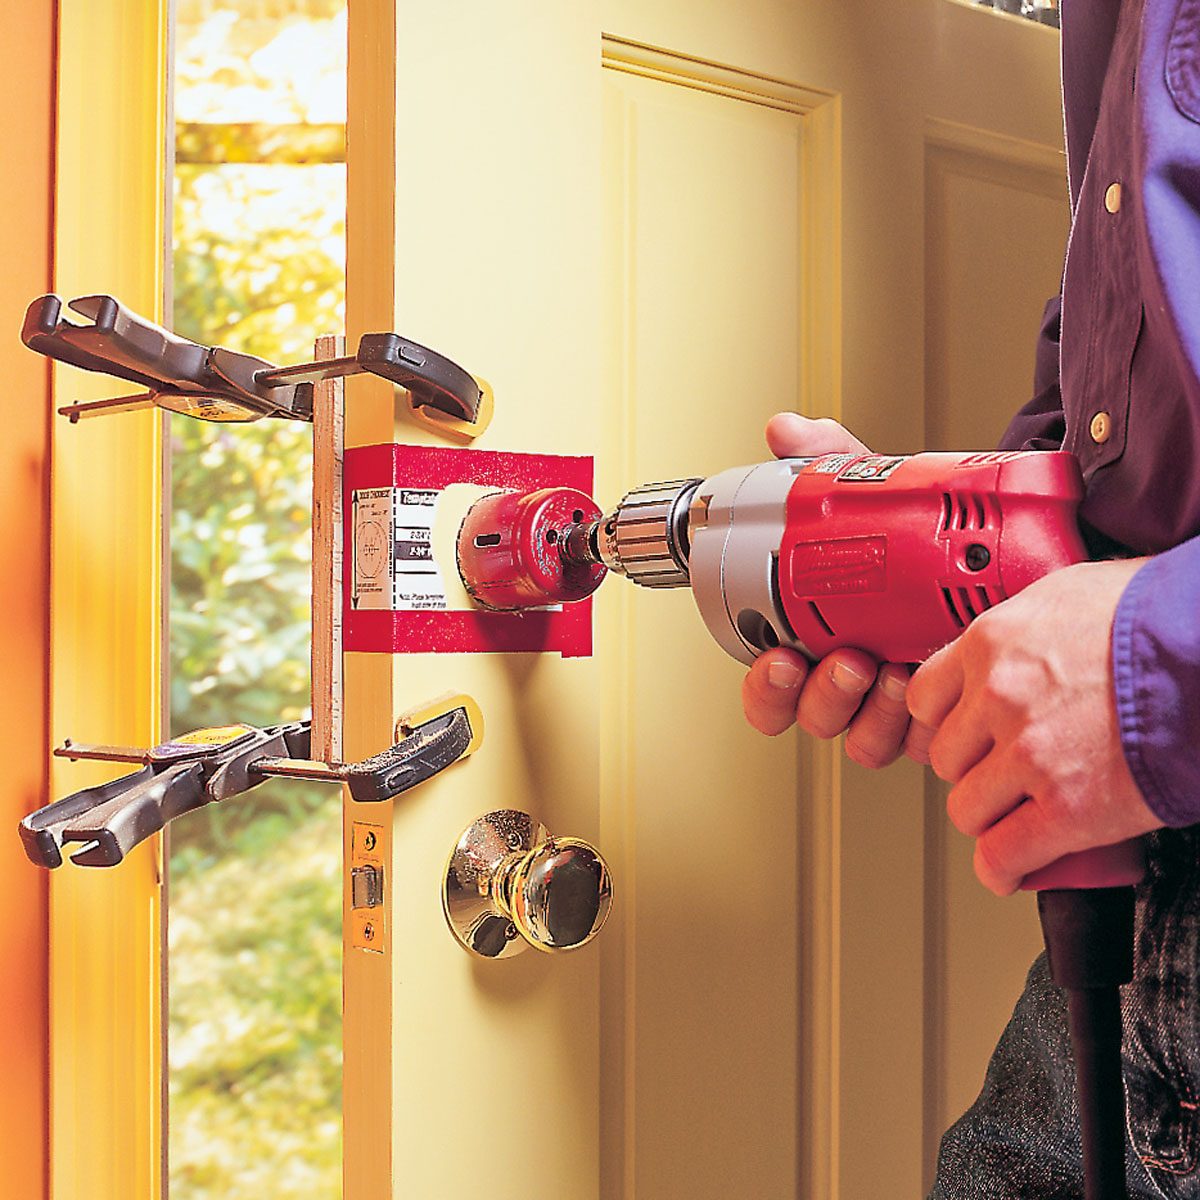 Drilling out a hole in Wooden Door, How To Install A Deadbolt Lock